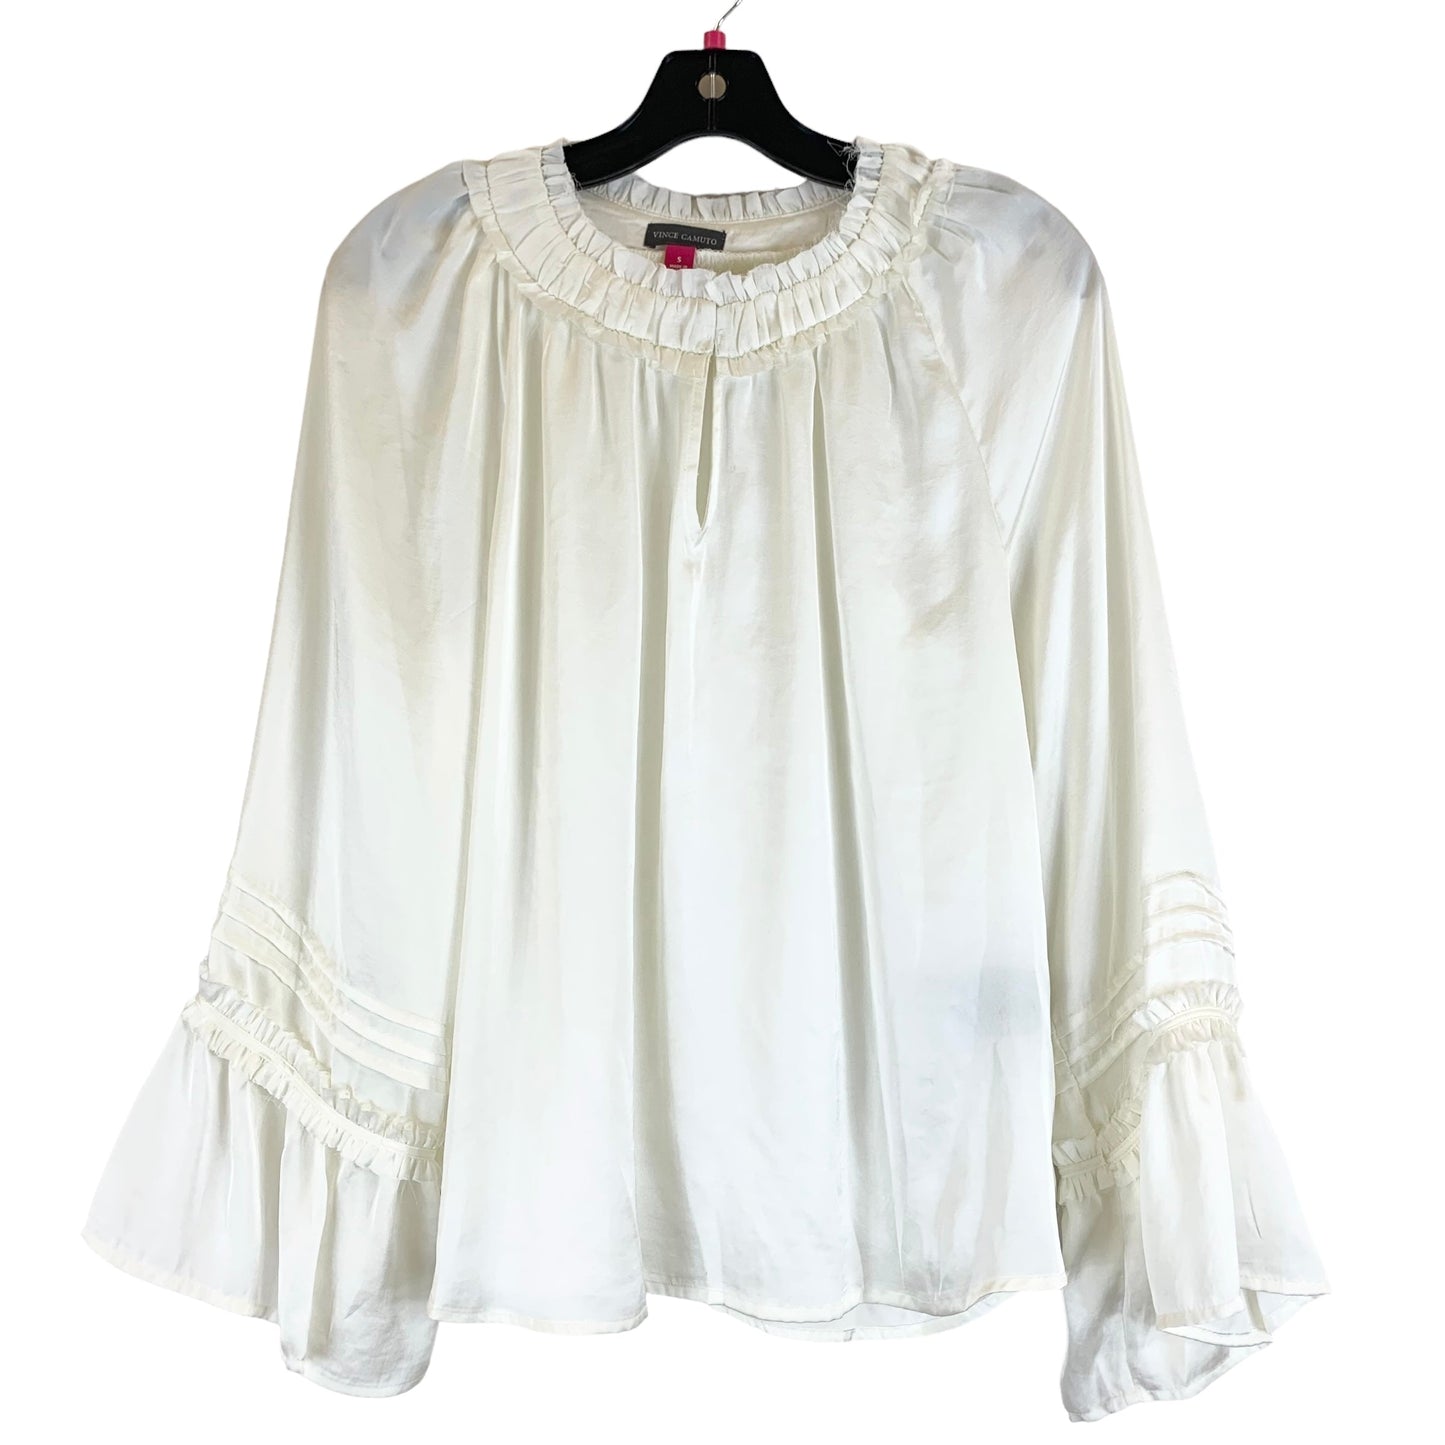 Ivory Top Long Sleeve Vince Camuto, Size S